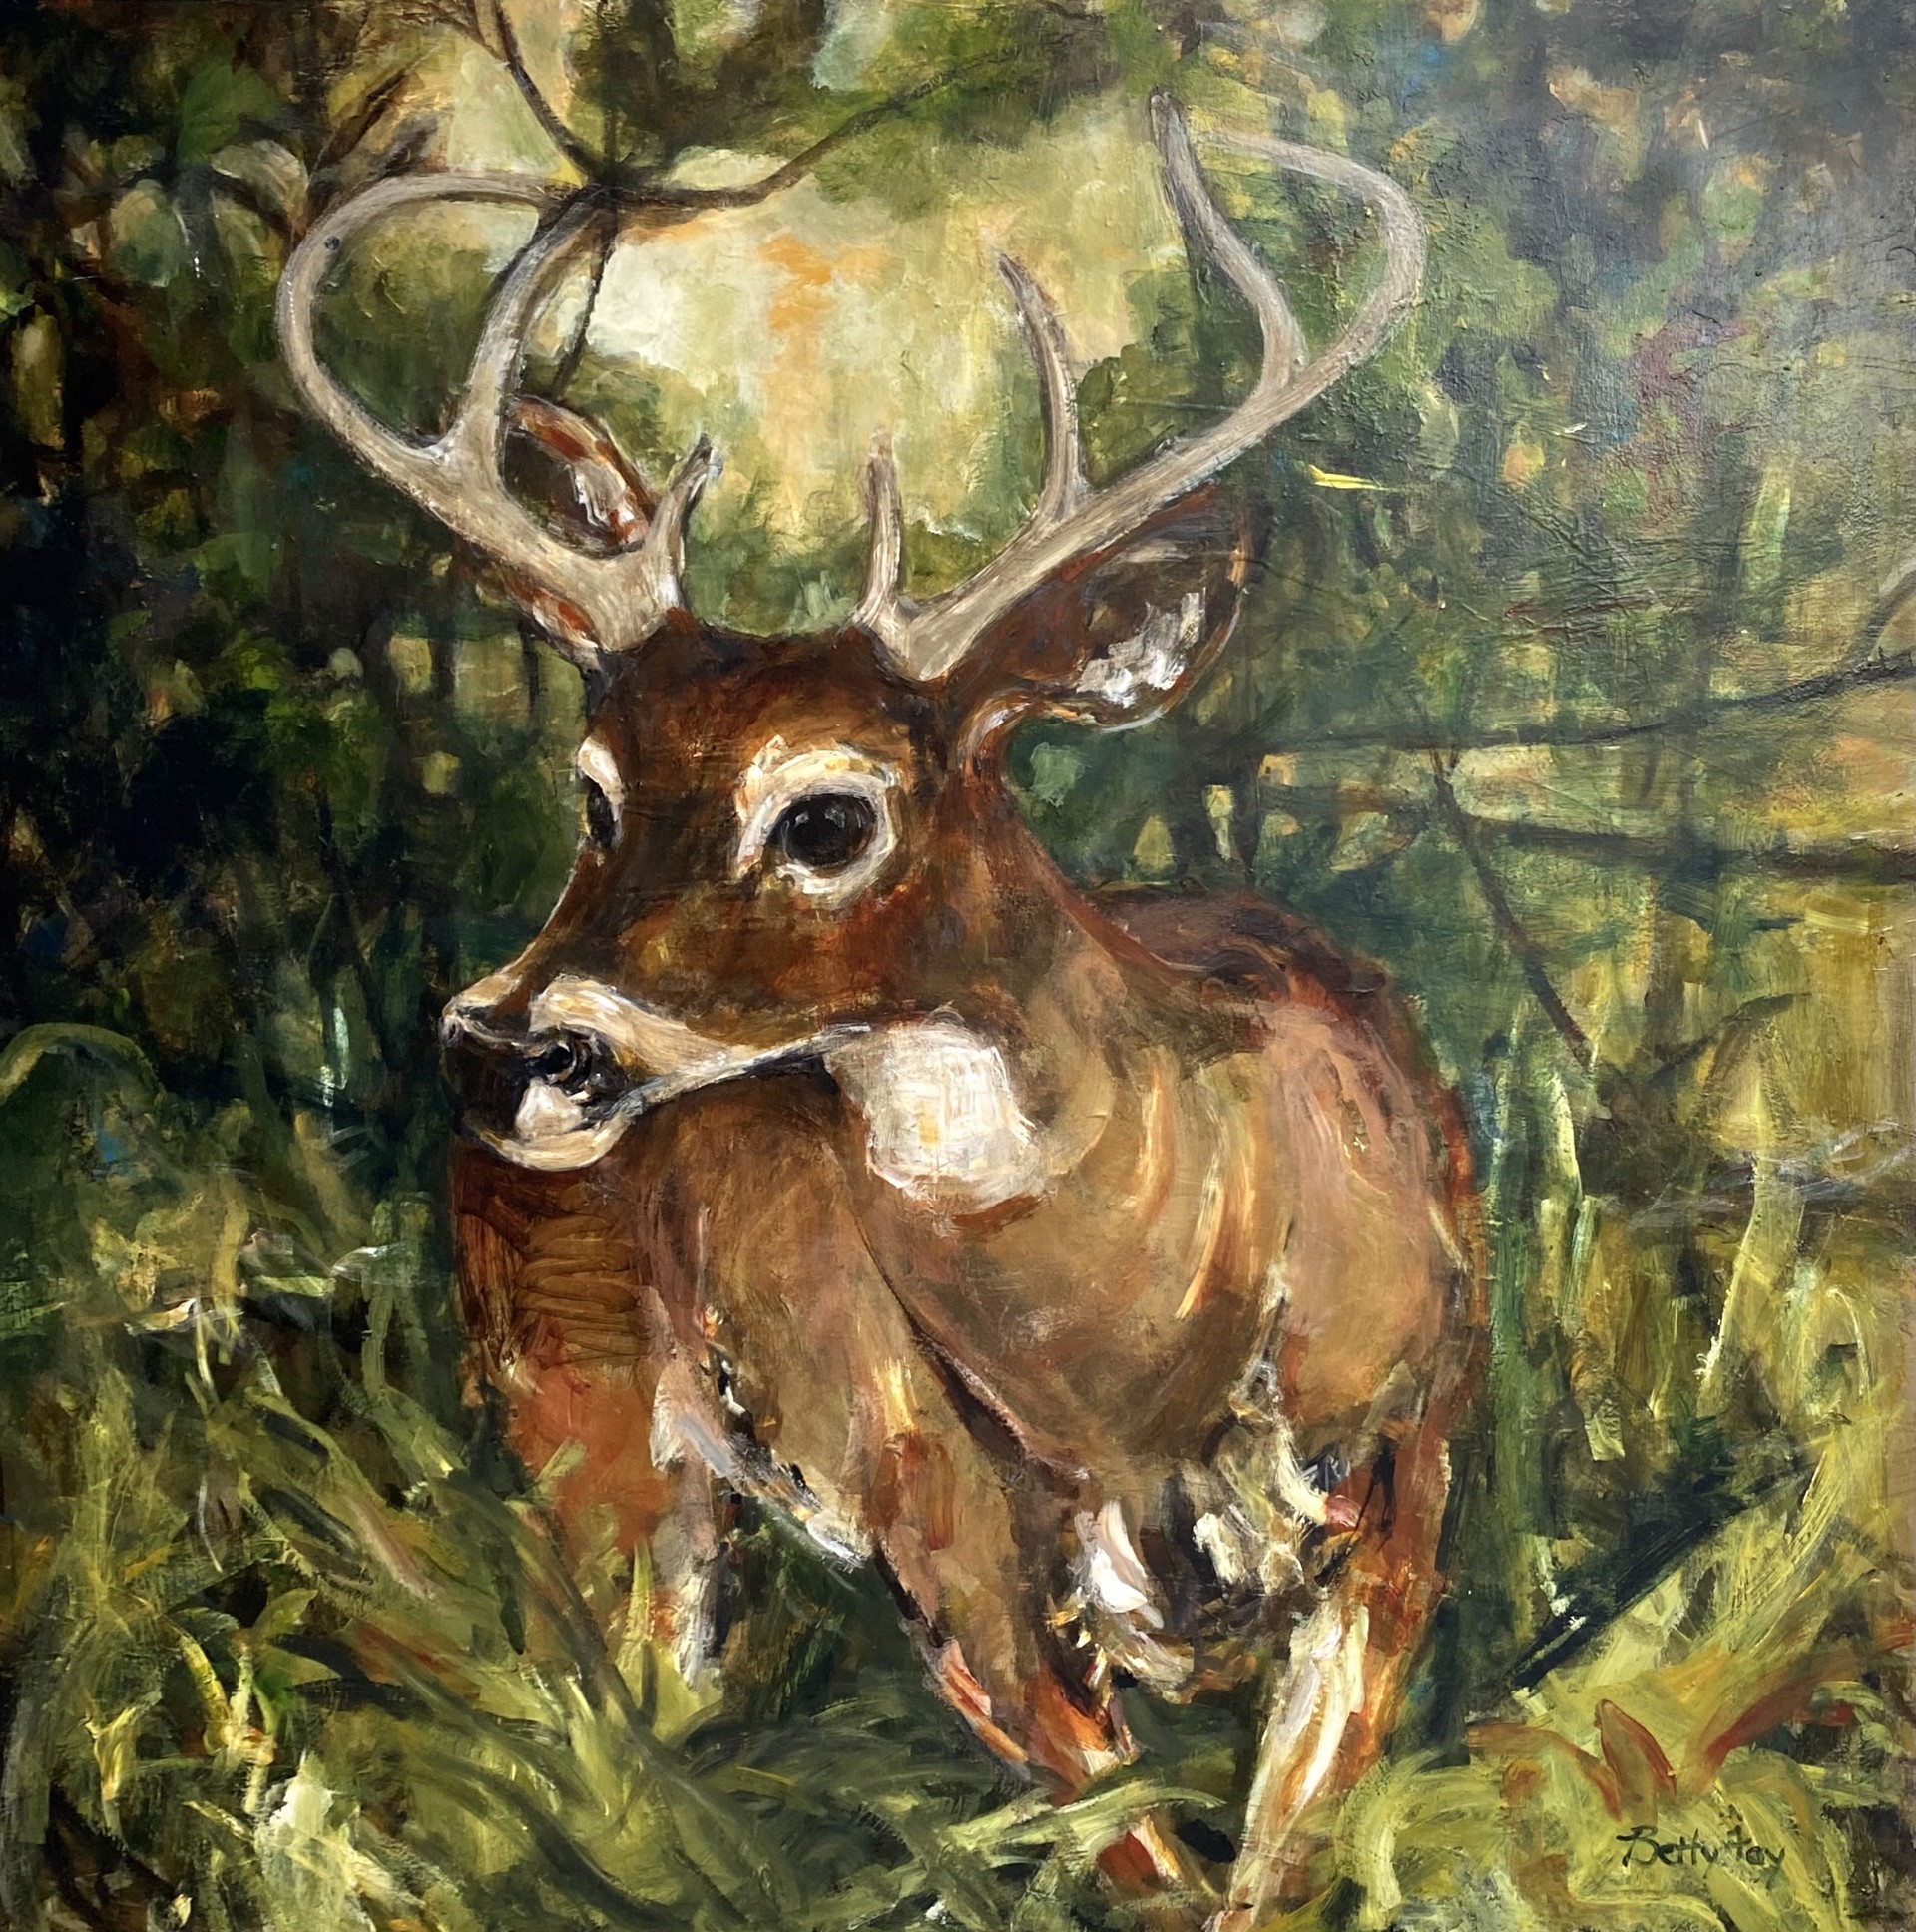 Majesty of the Moment (deer) by Betty Foy Botts